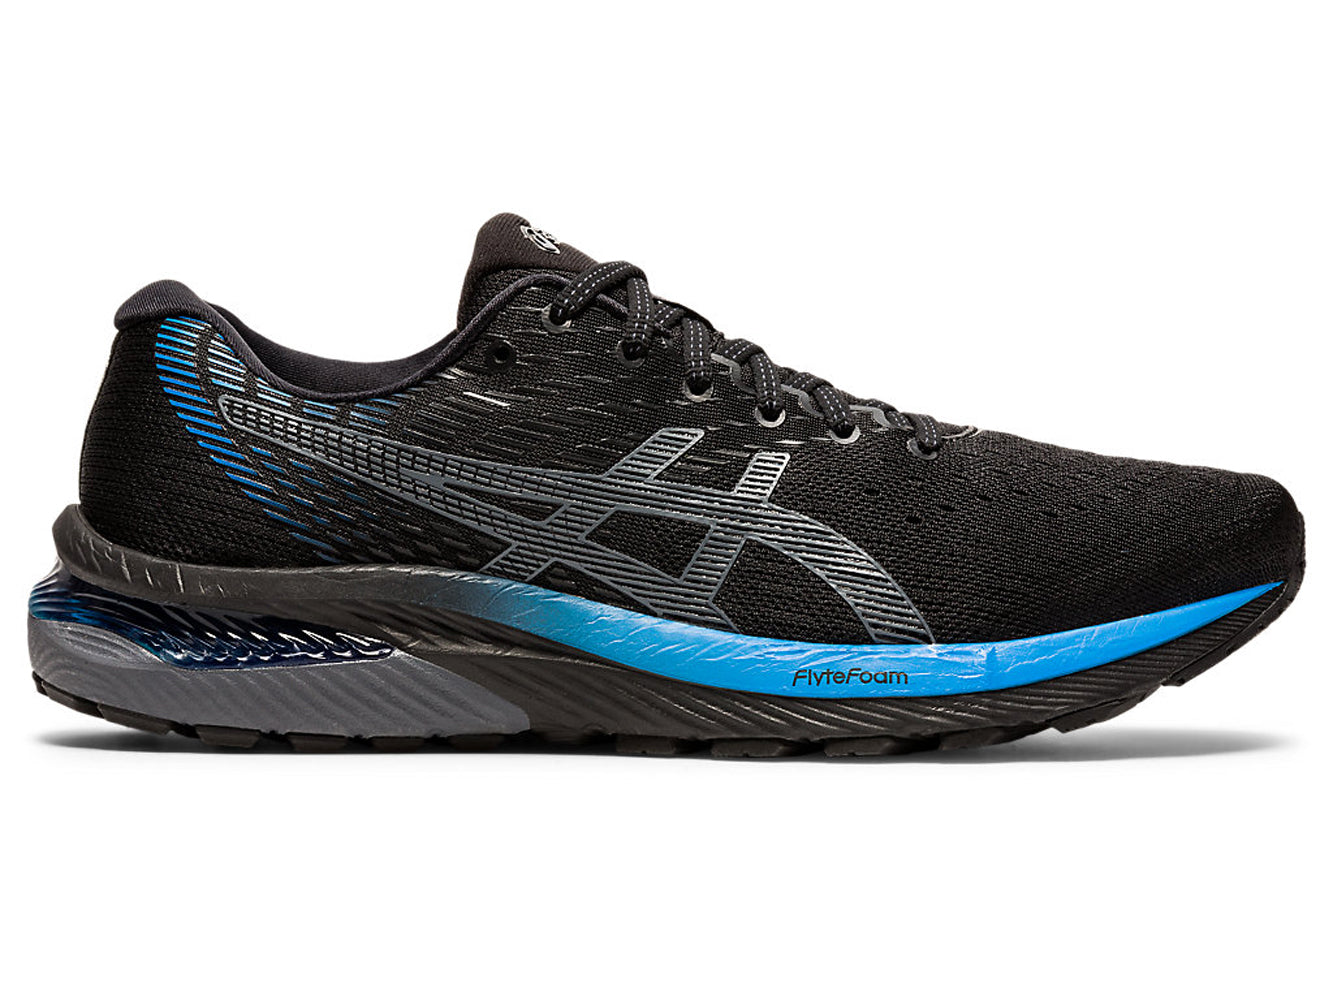 Men's Asics GEL-Cumulus 22 Running Shoe in Black/Directoire Blue from the side